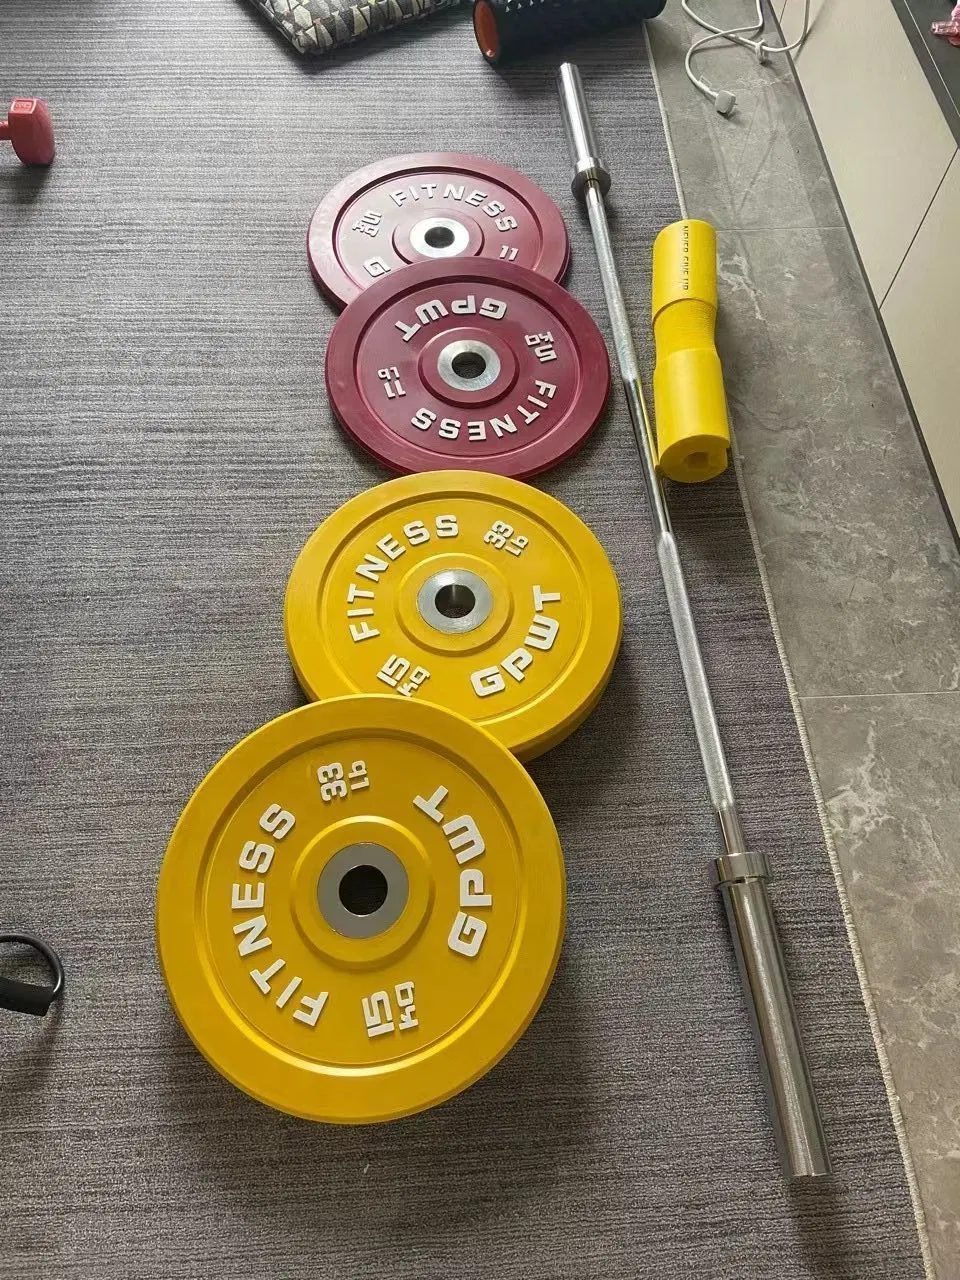 Colored Rubber Competitive Bumper Plates for Gym Training